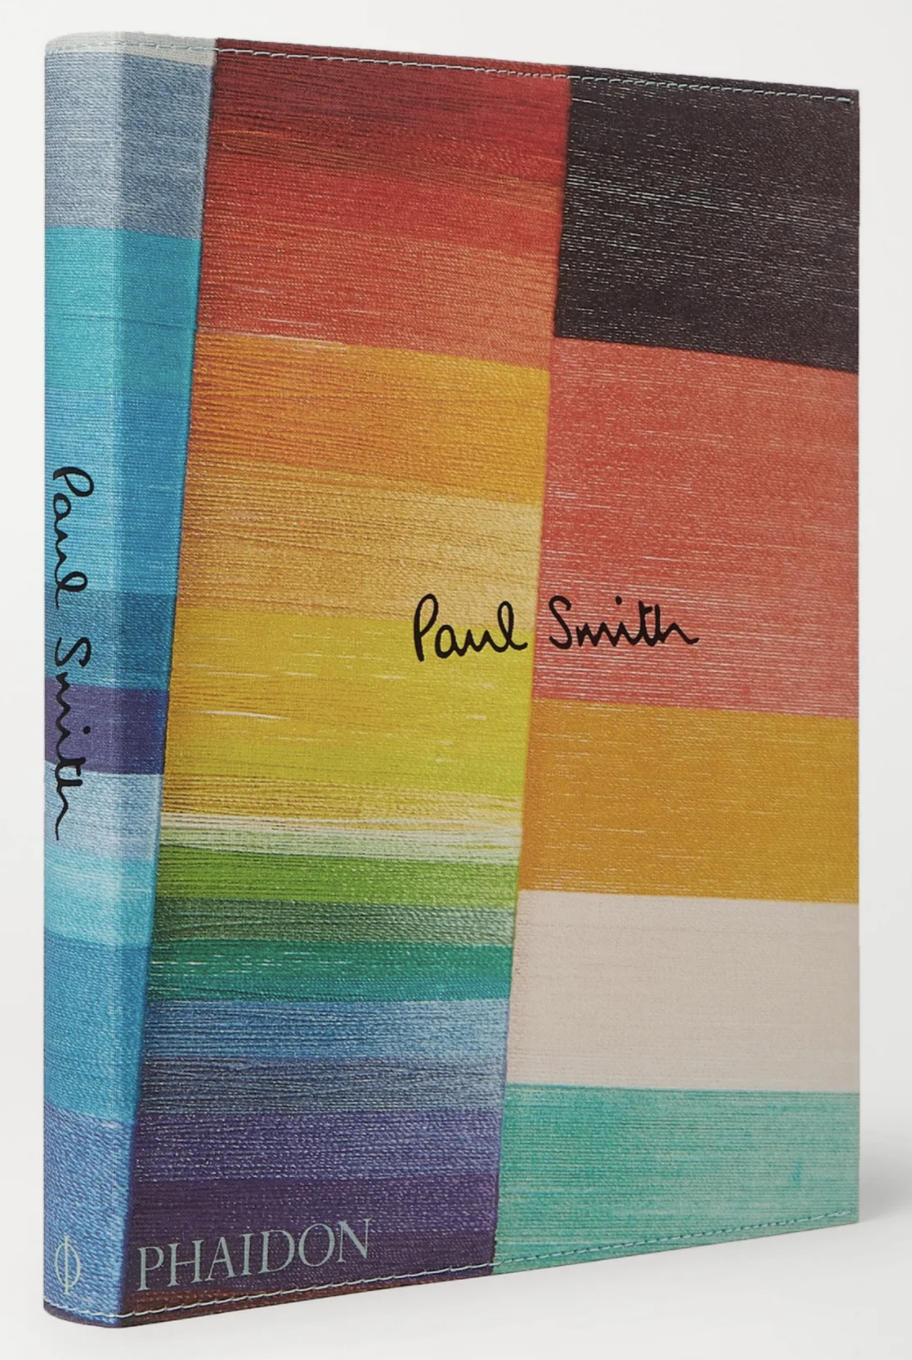 Paul Smith Book | Buster McGee Daylesford